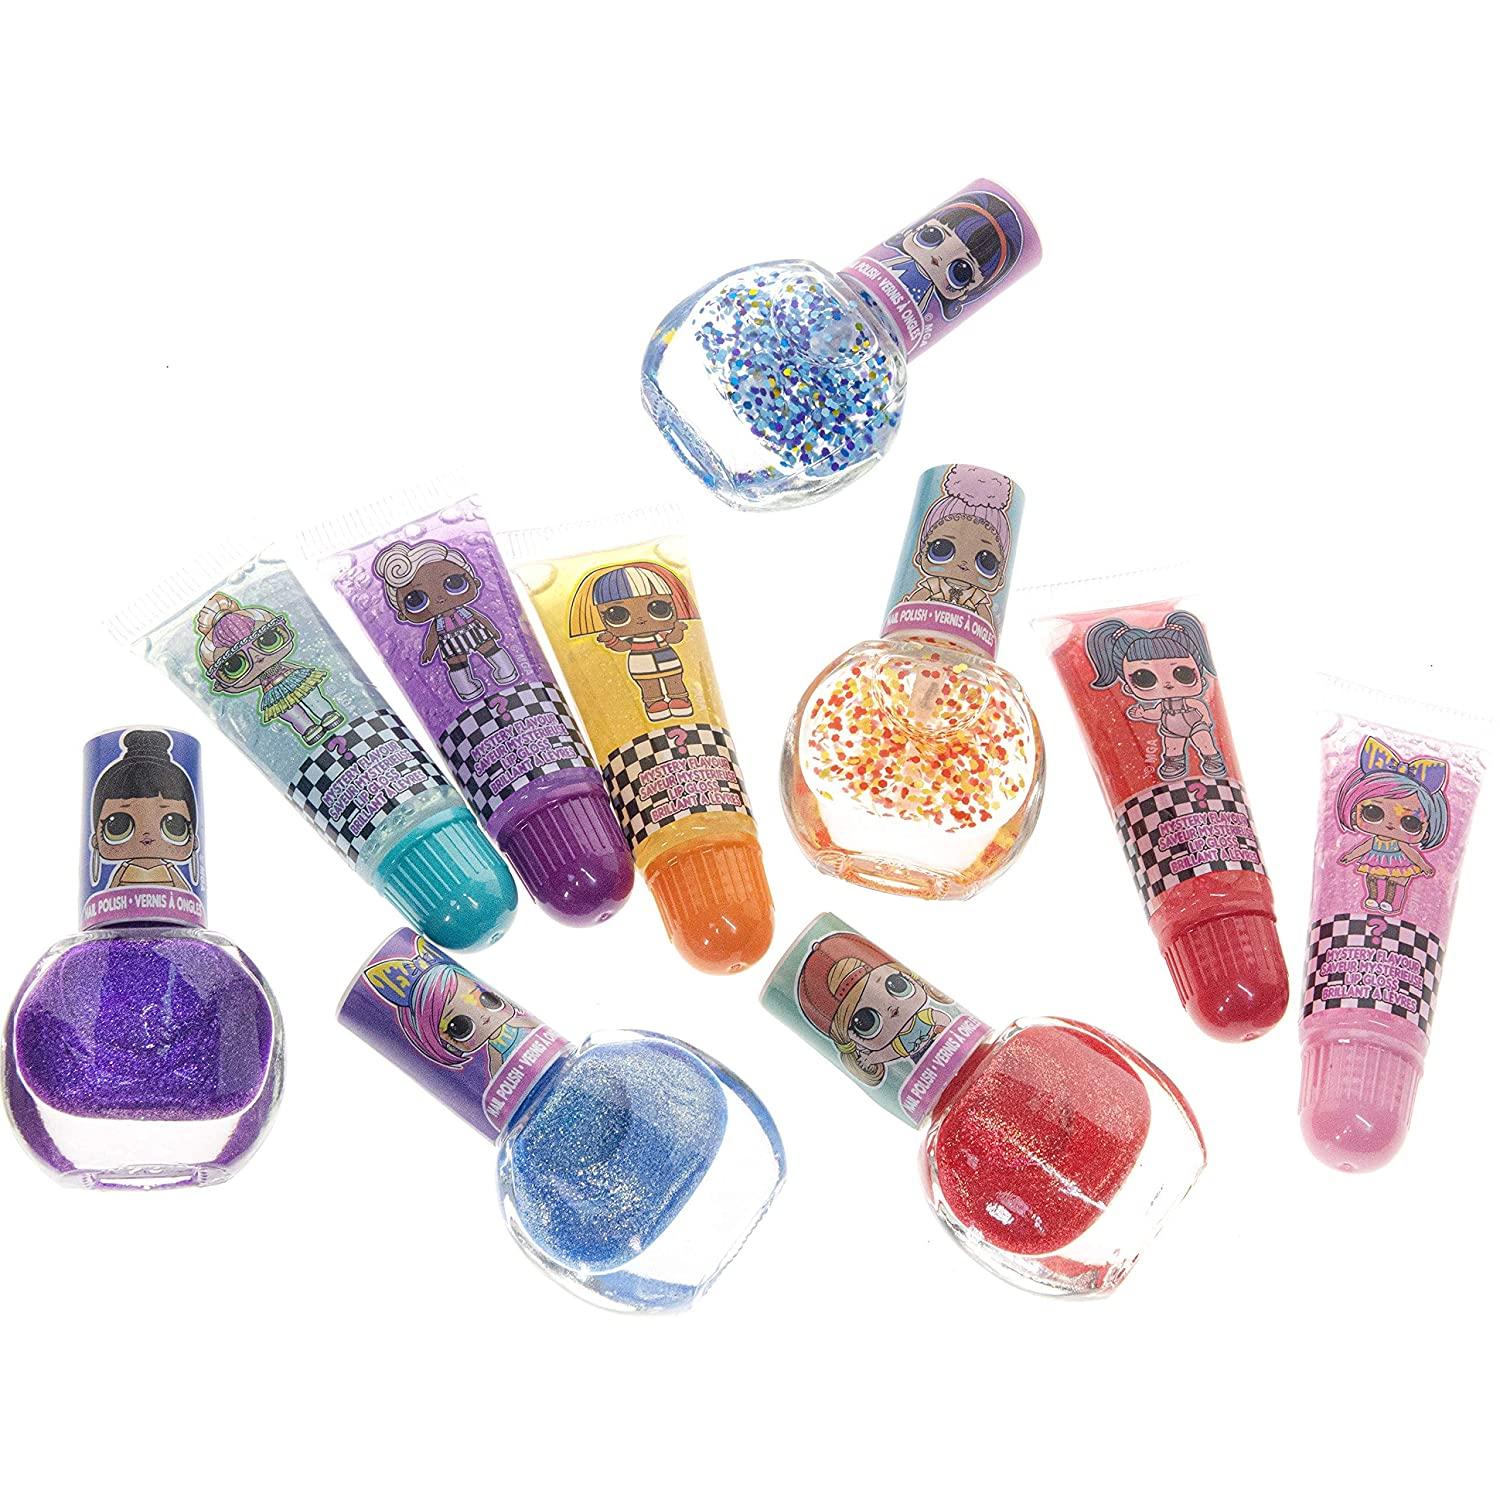 L.O.L. Surprise! Townley Girl 11 Pcs Sparkly Cosmetic Makeup Set for Kids  Includes 5 Lip Gloss, 5 Nail Polish & Nail Stickers for Girls Tweens, Ages  5+ Perfect for Parties, Sleepovers and Makeovers